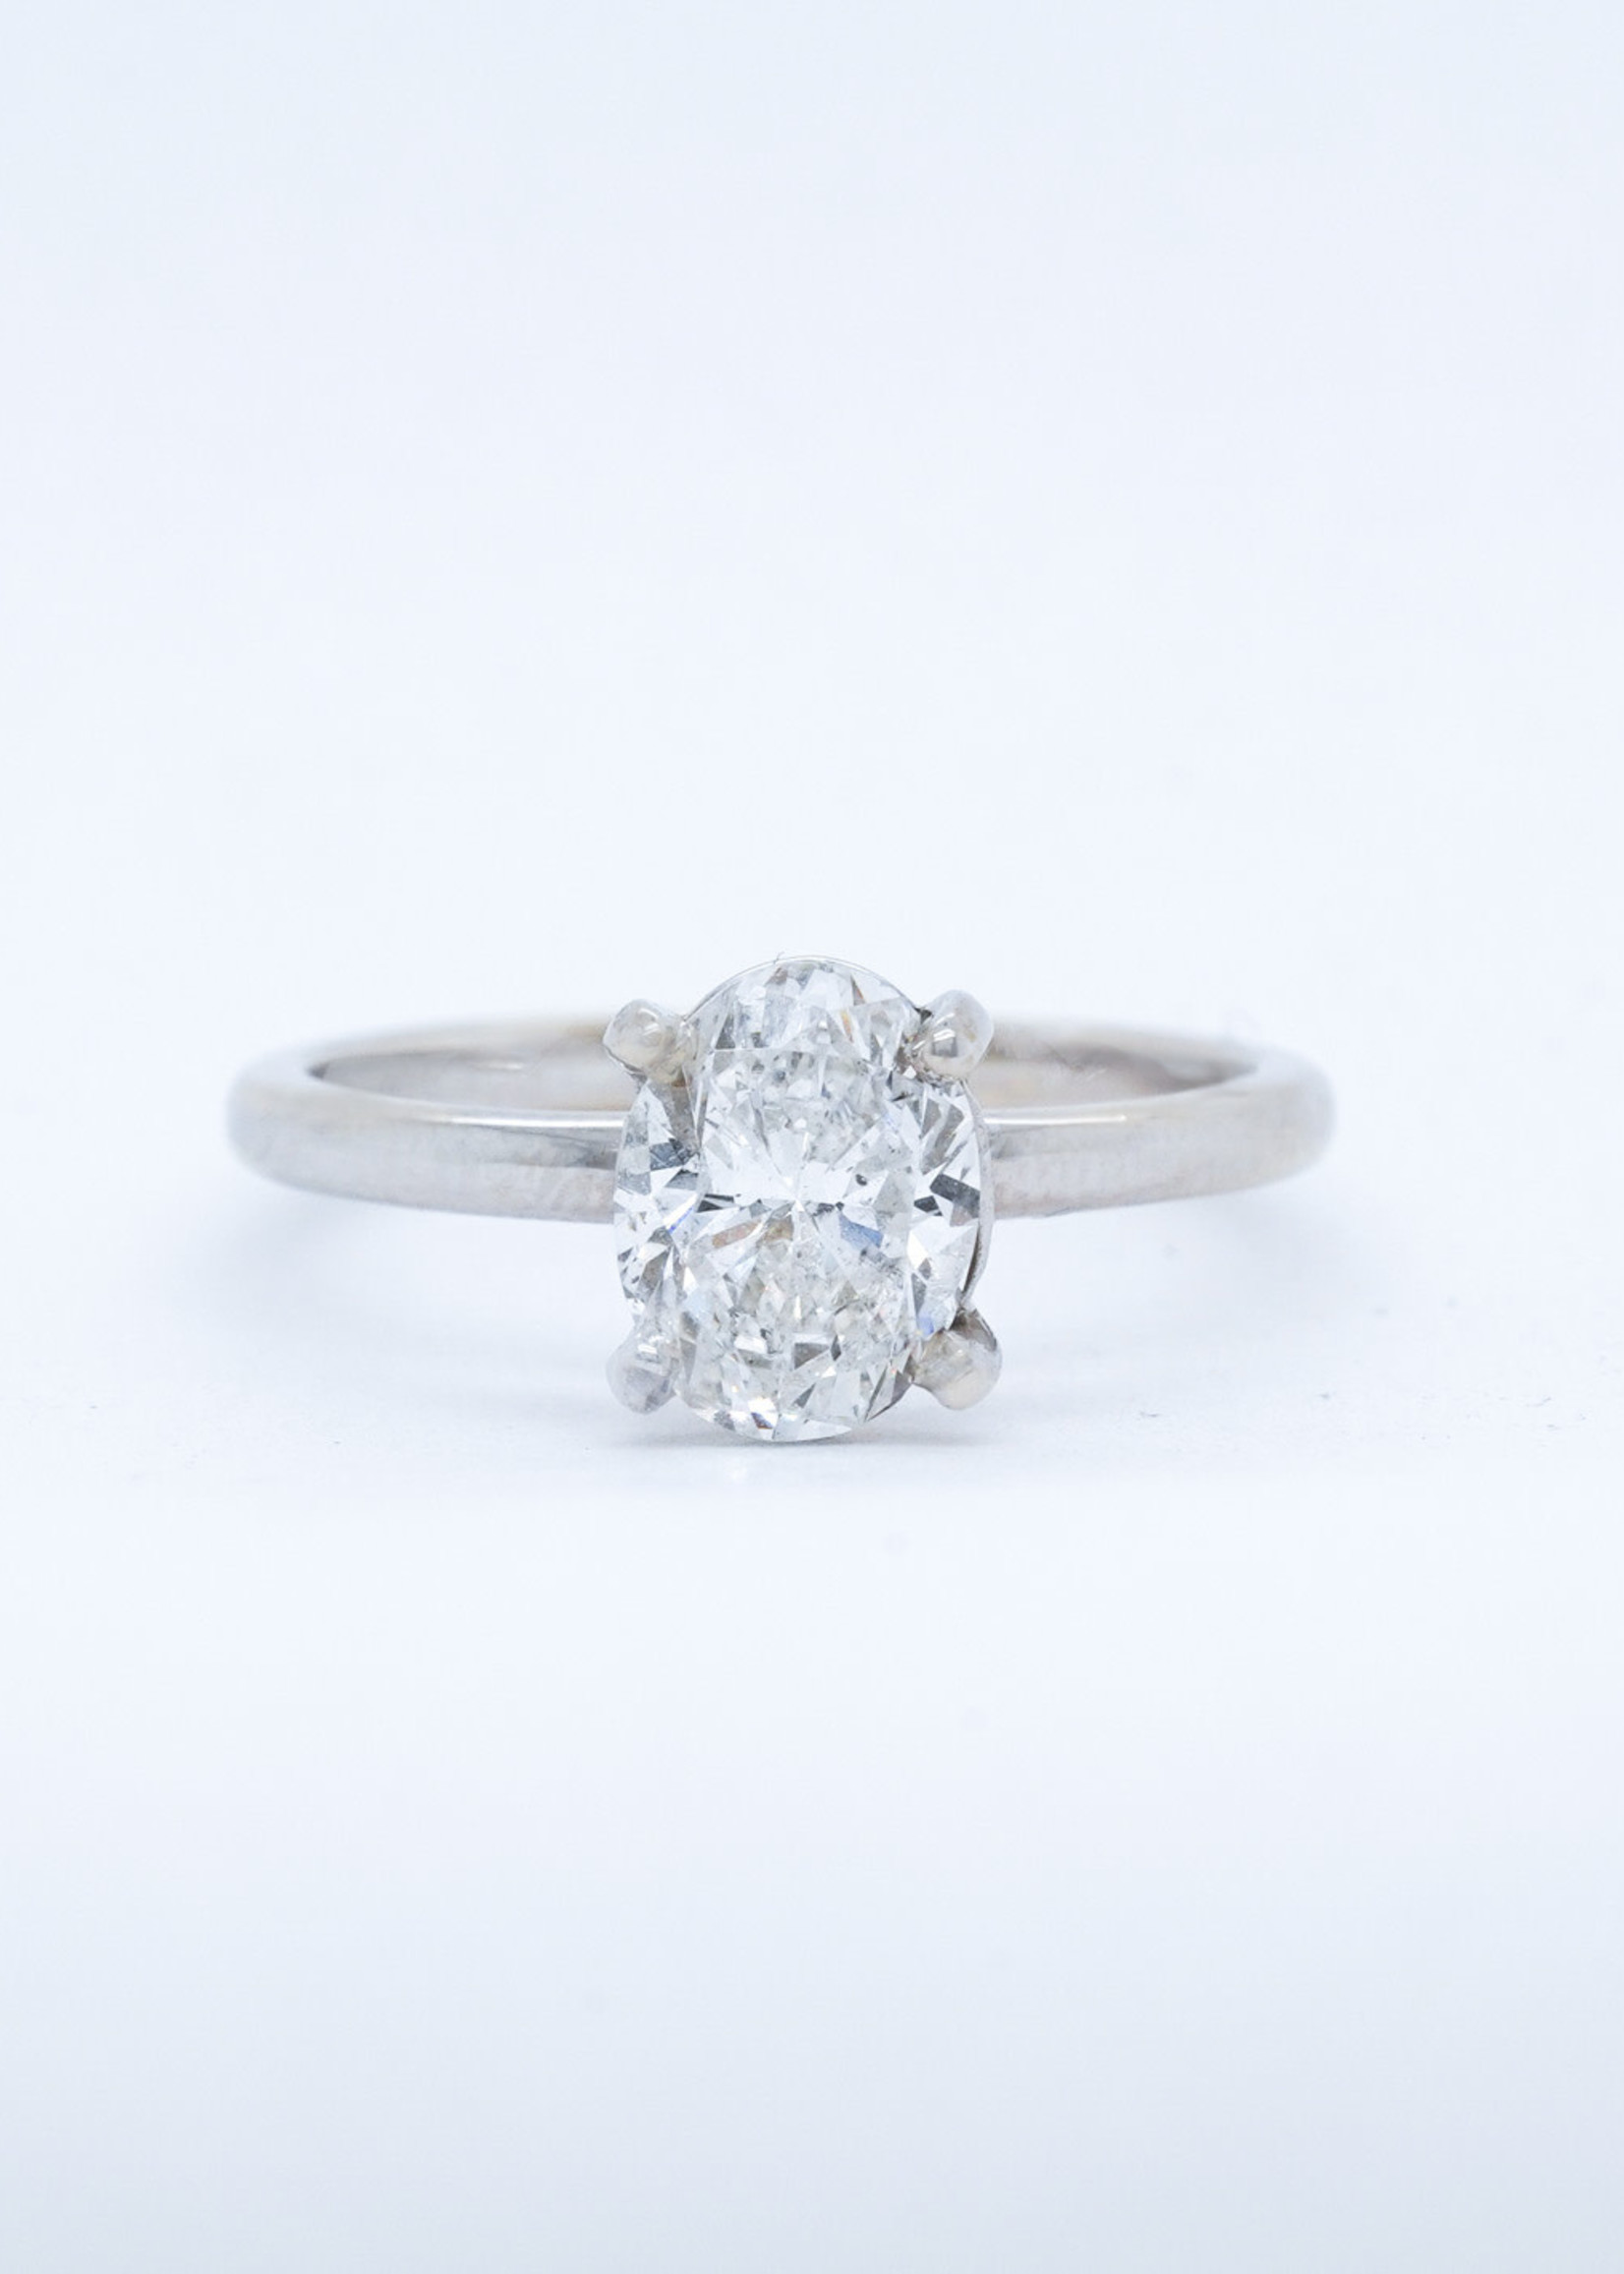 14KW 2.97g 1.59ct H/SI2 Oval Diamond Solitaire Ring (size 7)